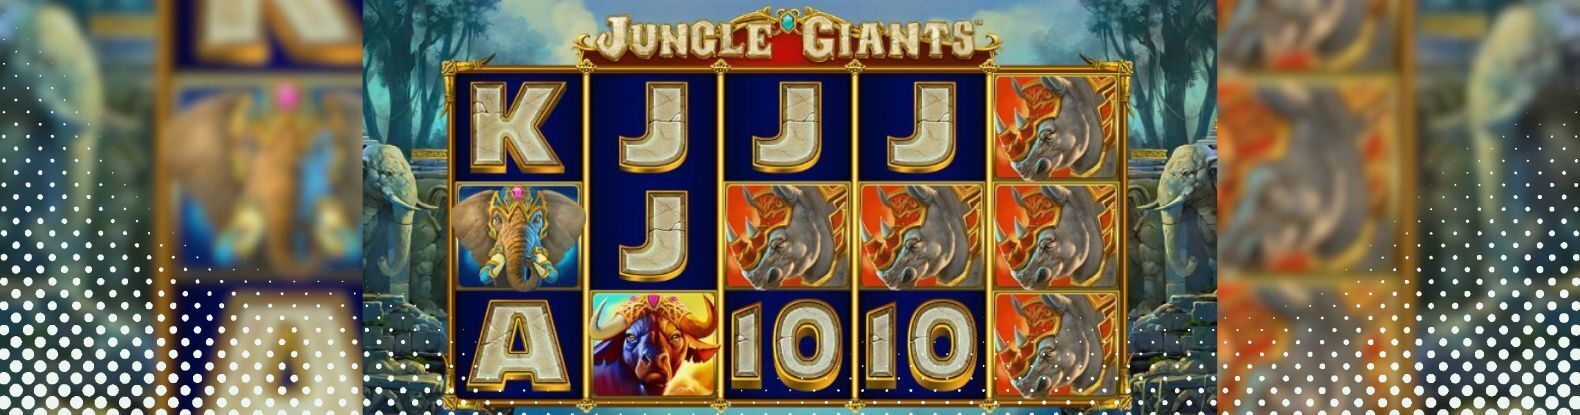 This is a screenshot of Jungle Giants online pokies game by Playtech